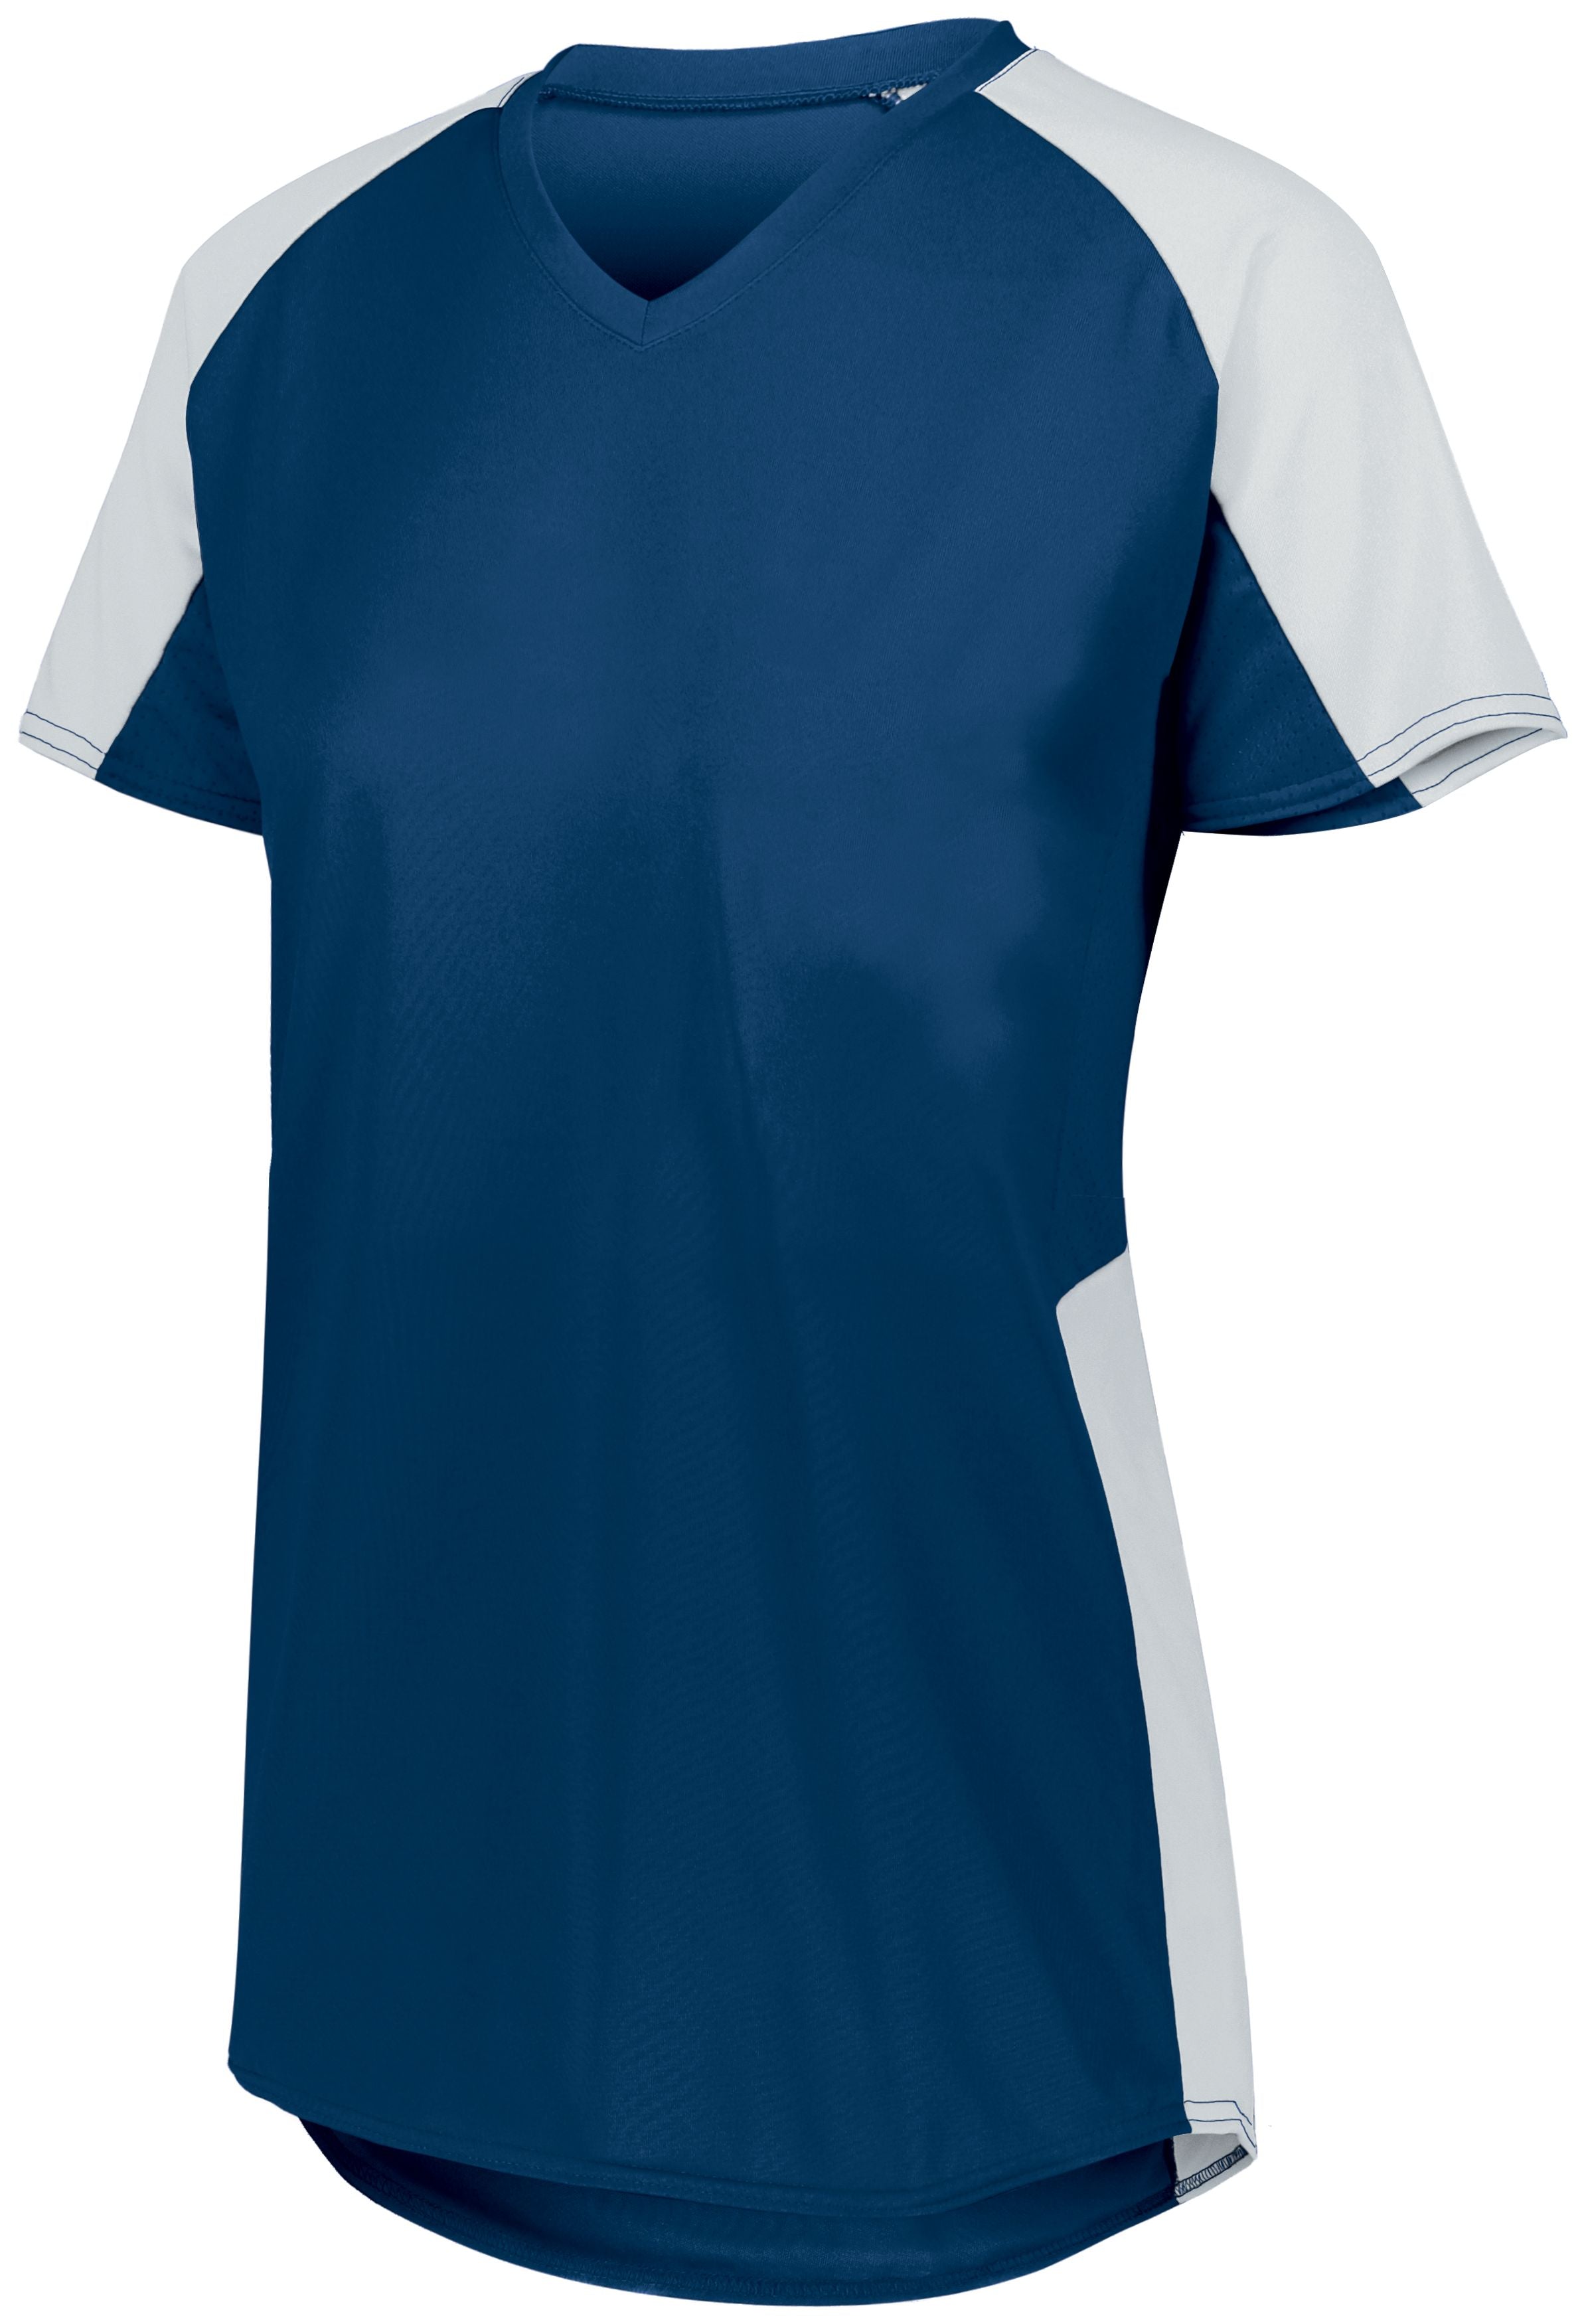 Augusta Sportswear Ladies Cutter Jersey in Navy/White  -Part of the Ladies, Ladies-Jersey, Augusta-Products, Softball, Shirts product lines at KanaleyCreations.com